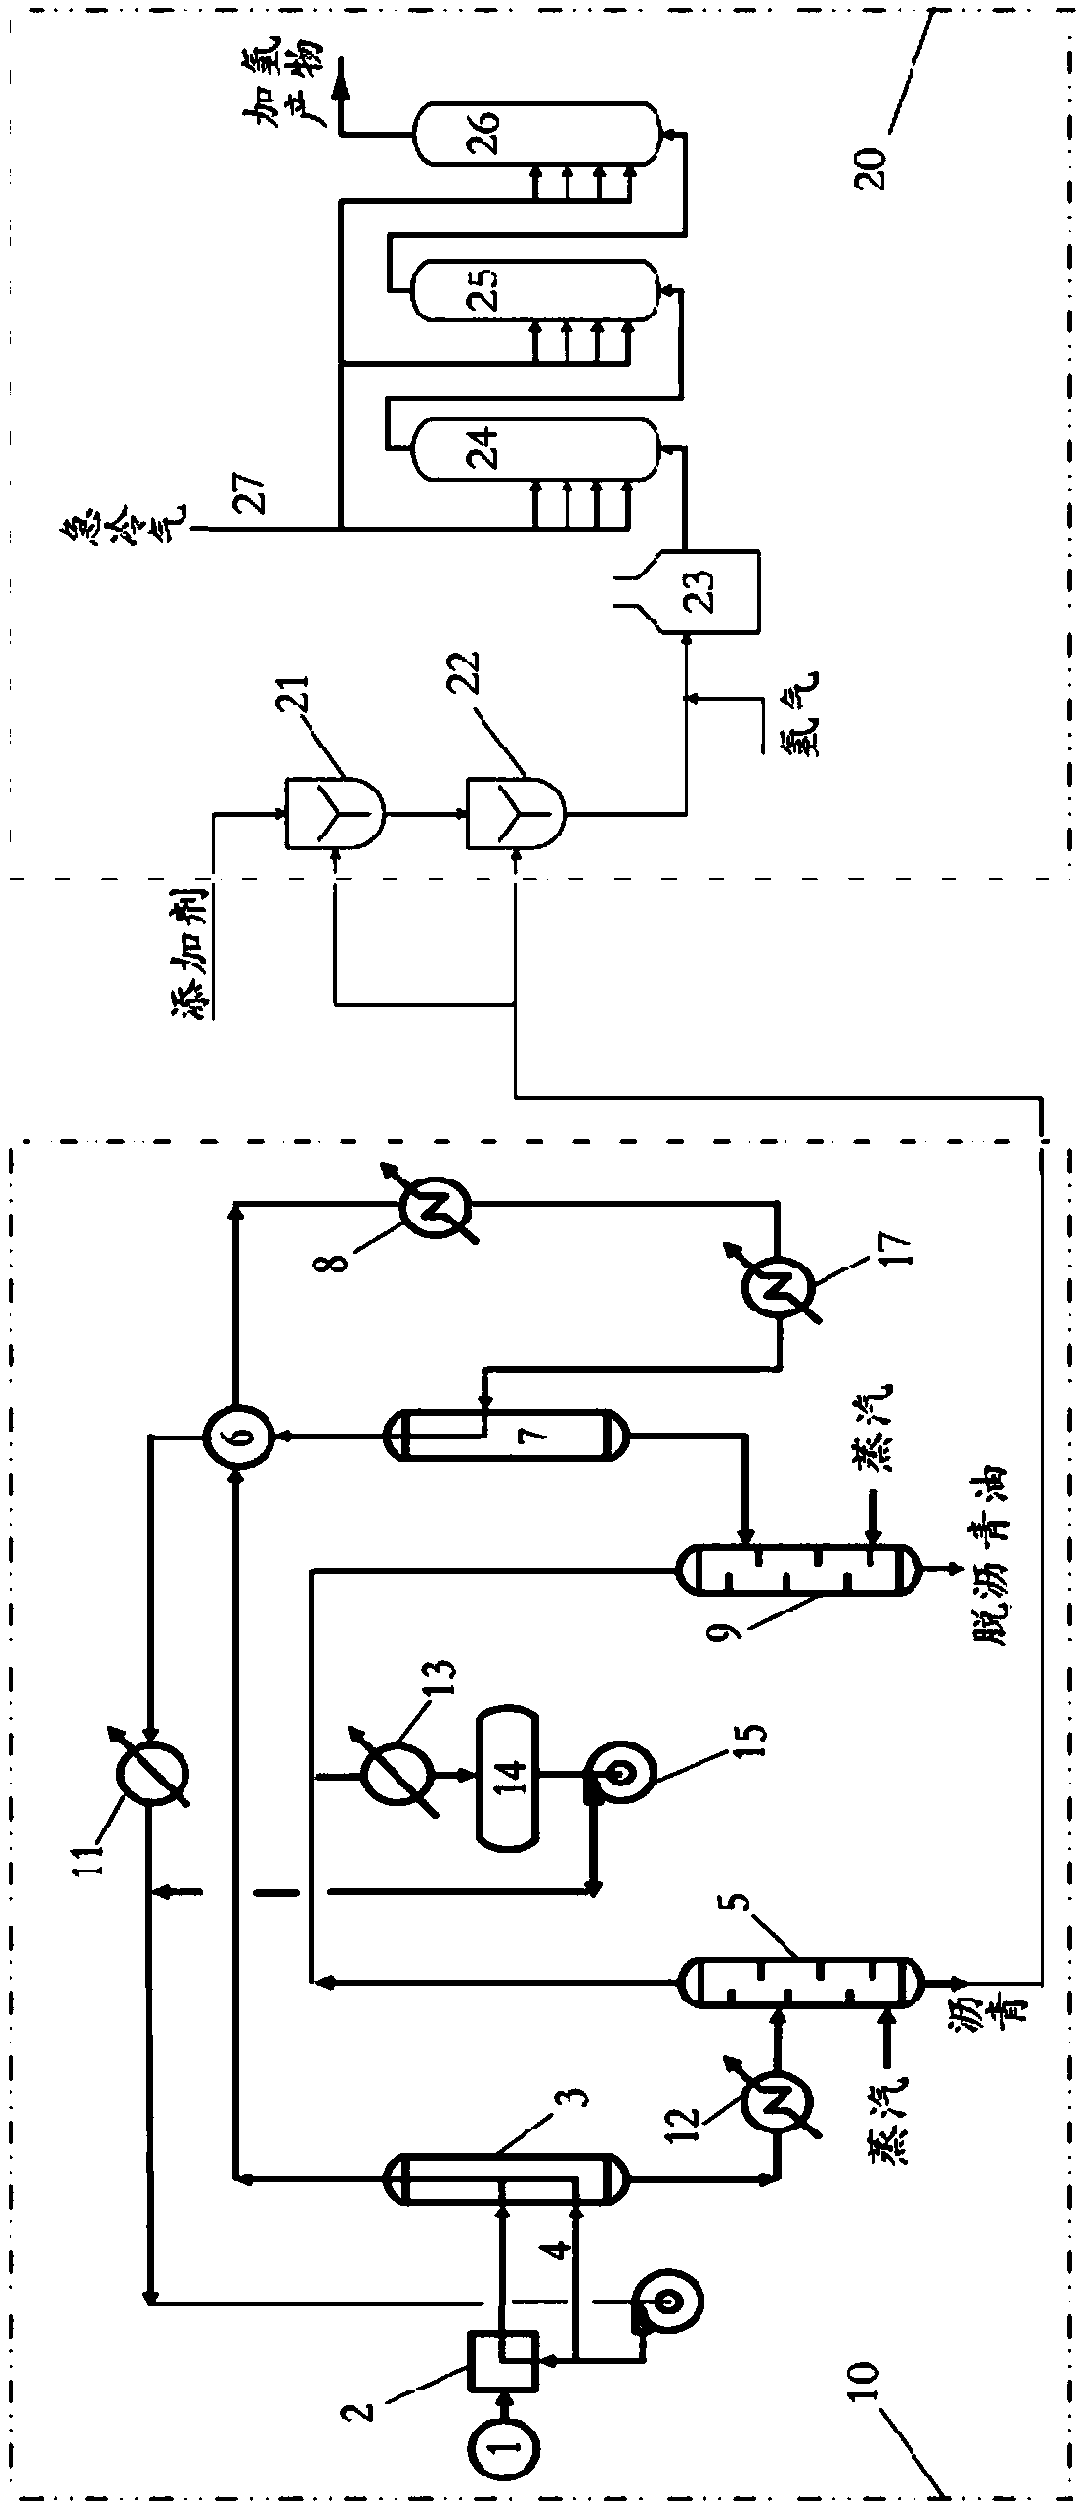 Combination system and method of supercritical extraction and suspension bed hydrogenation of heavy oil feedstock